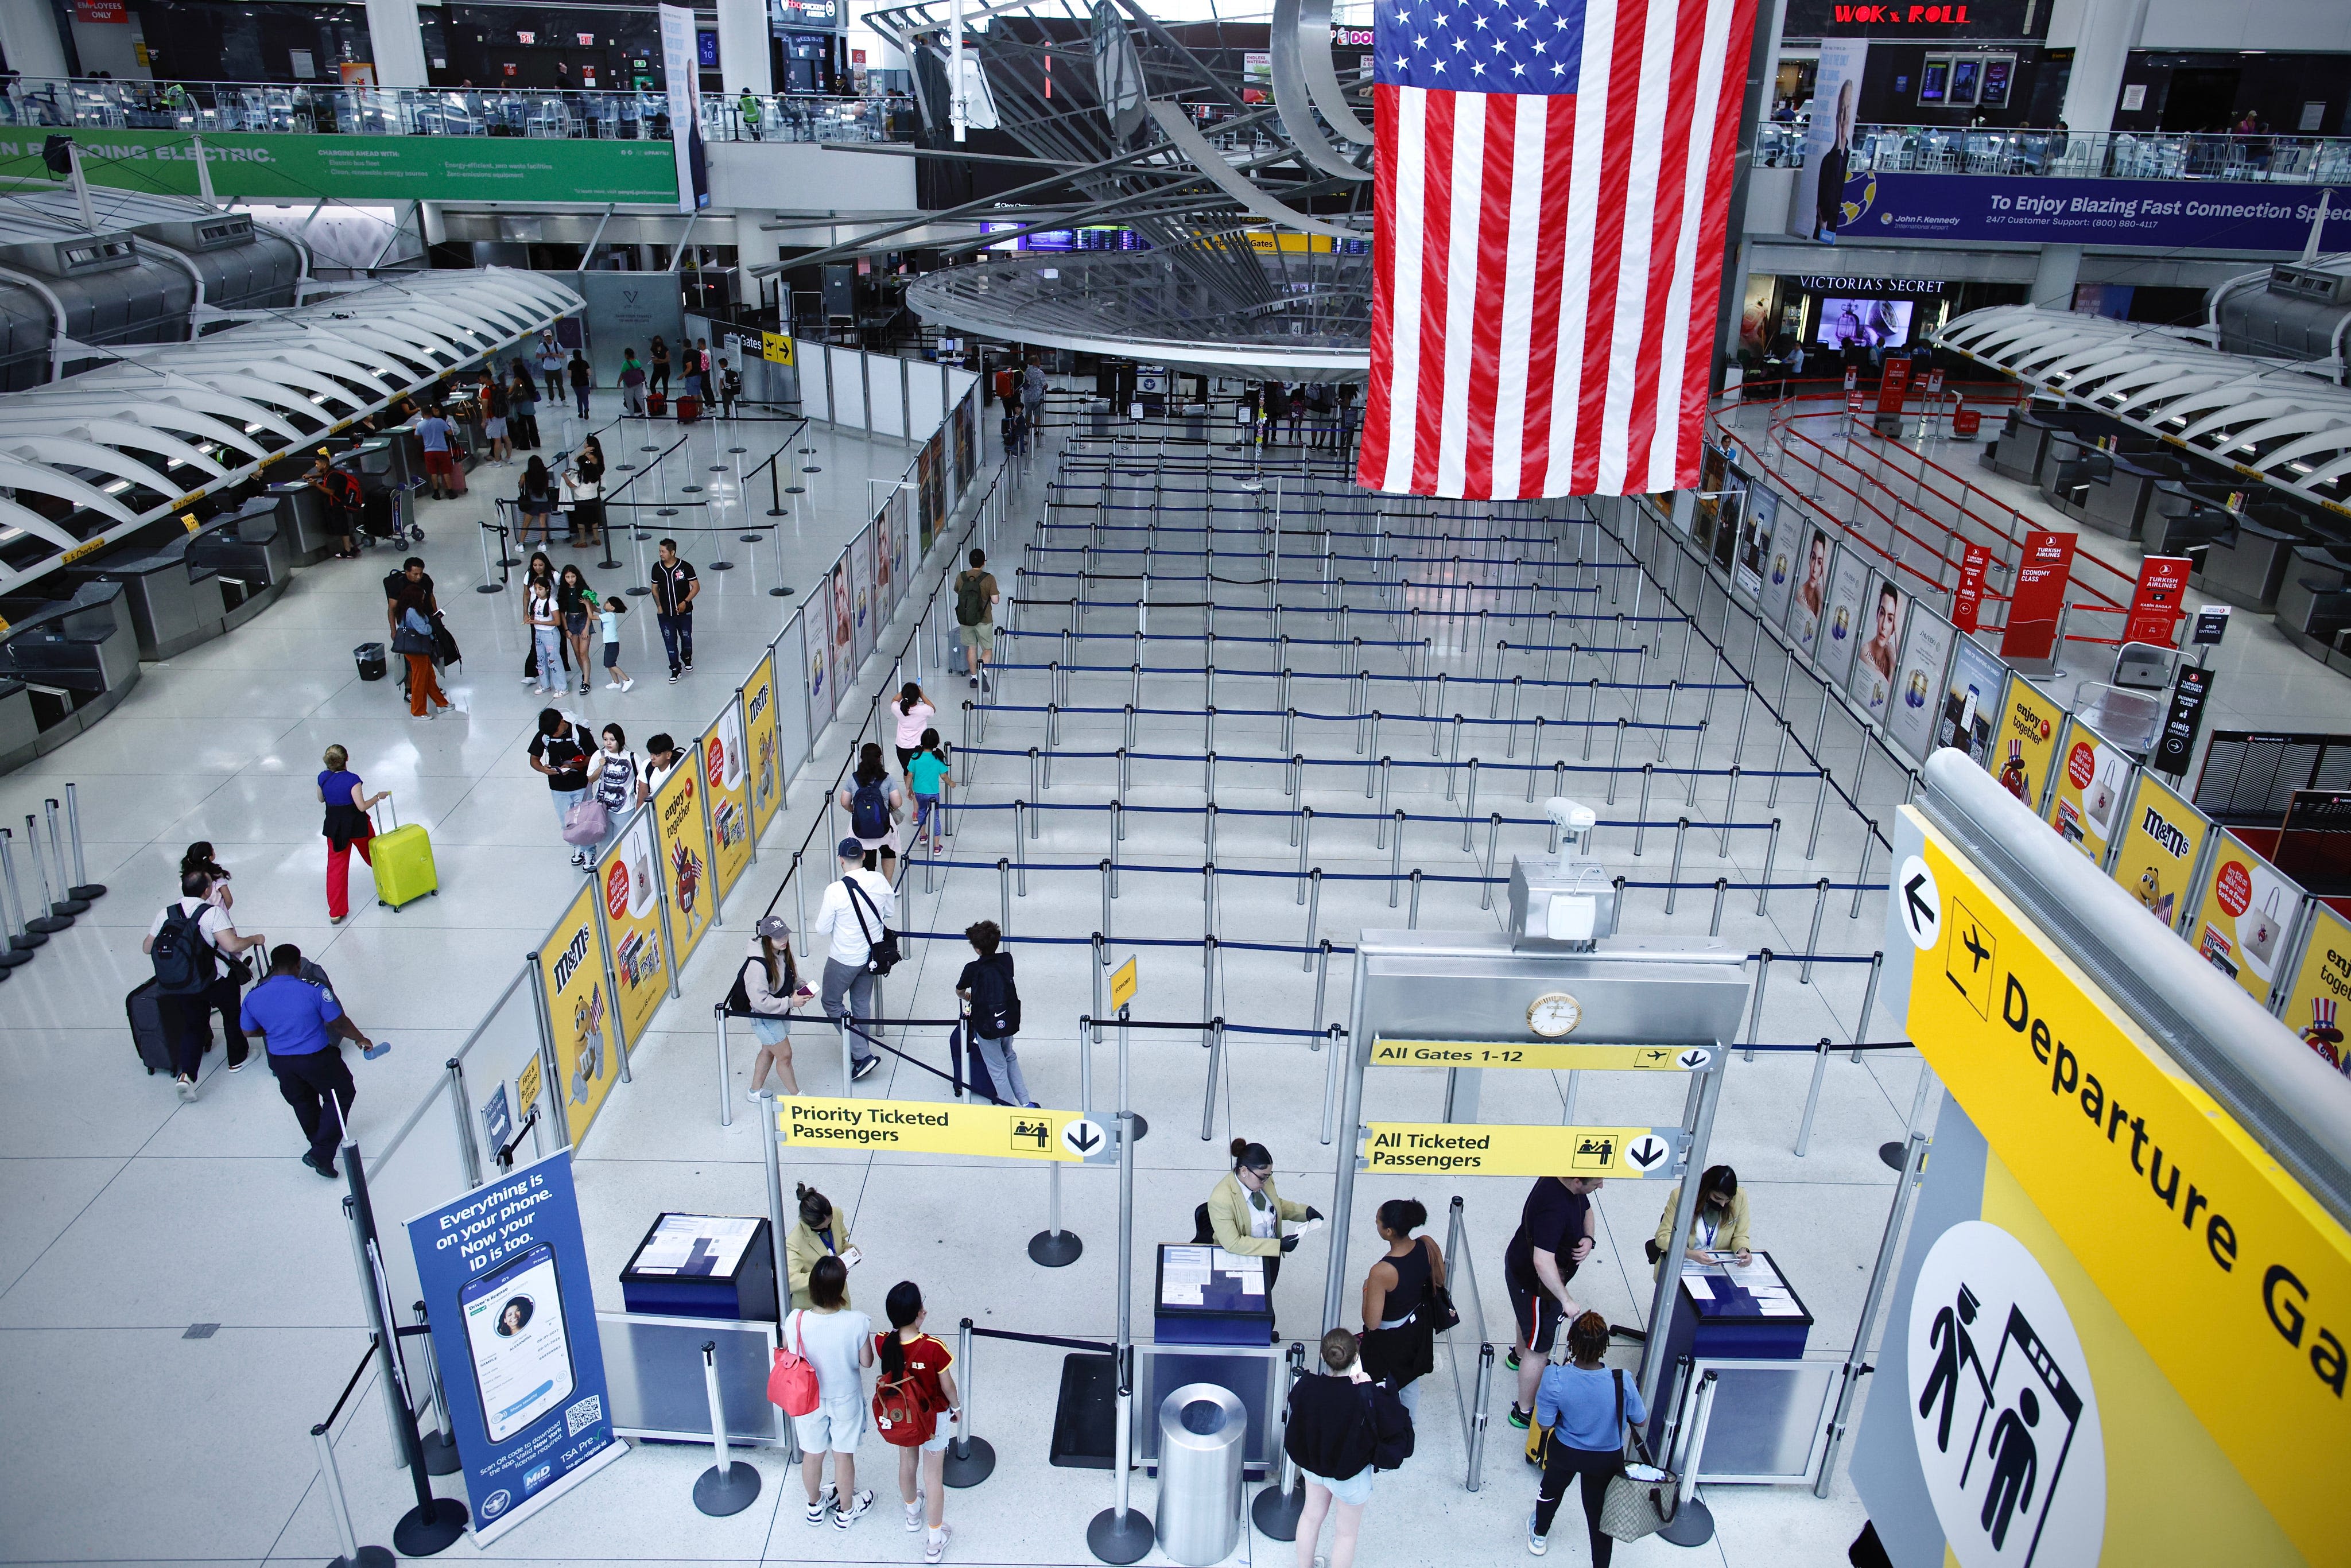 Escalator catches fire at JFK Airport: At least 9 people injured, 4 of them hospitalized